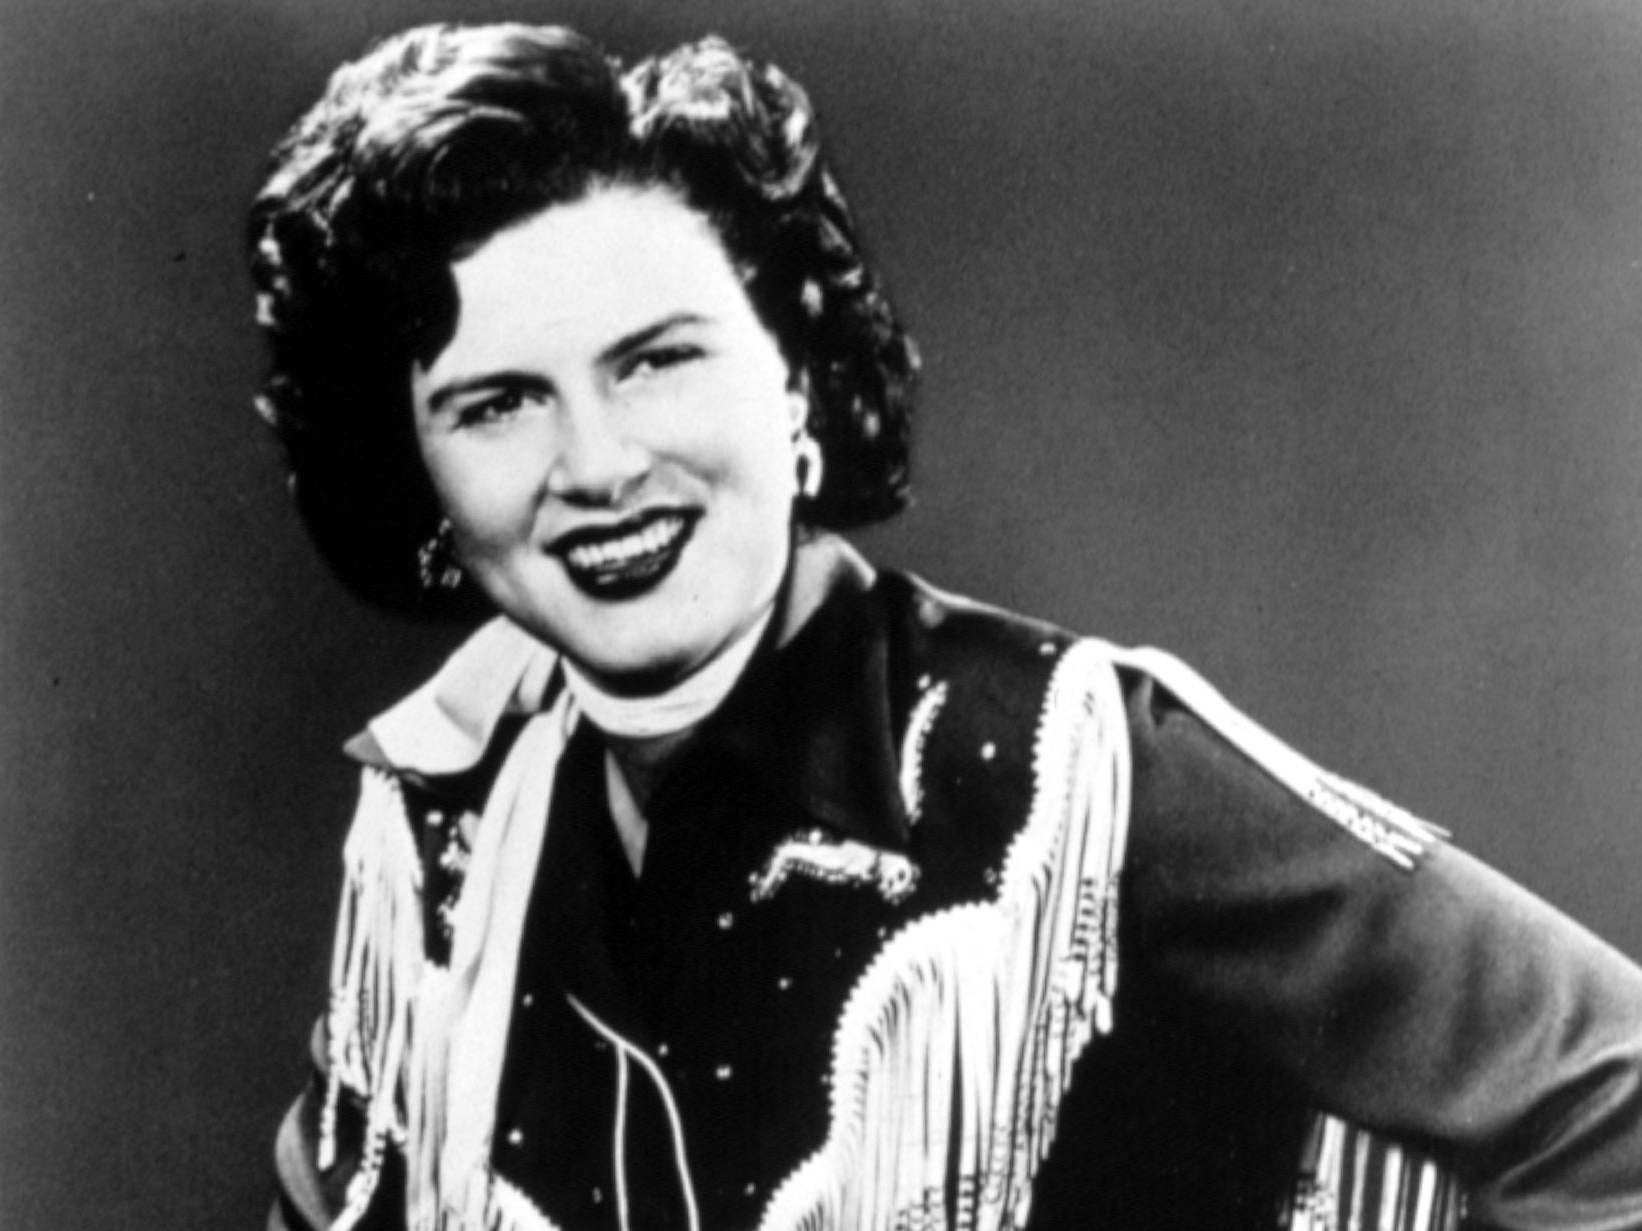 Patsy Cline died on her way home to Nashville after playing a benefit show in Kansas, when her plane crashed in heavy weather